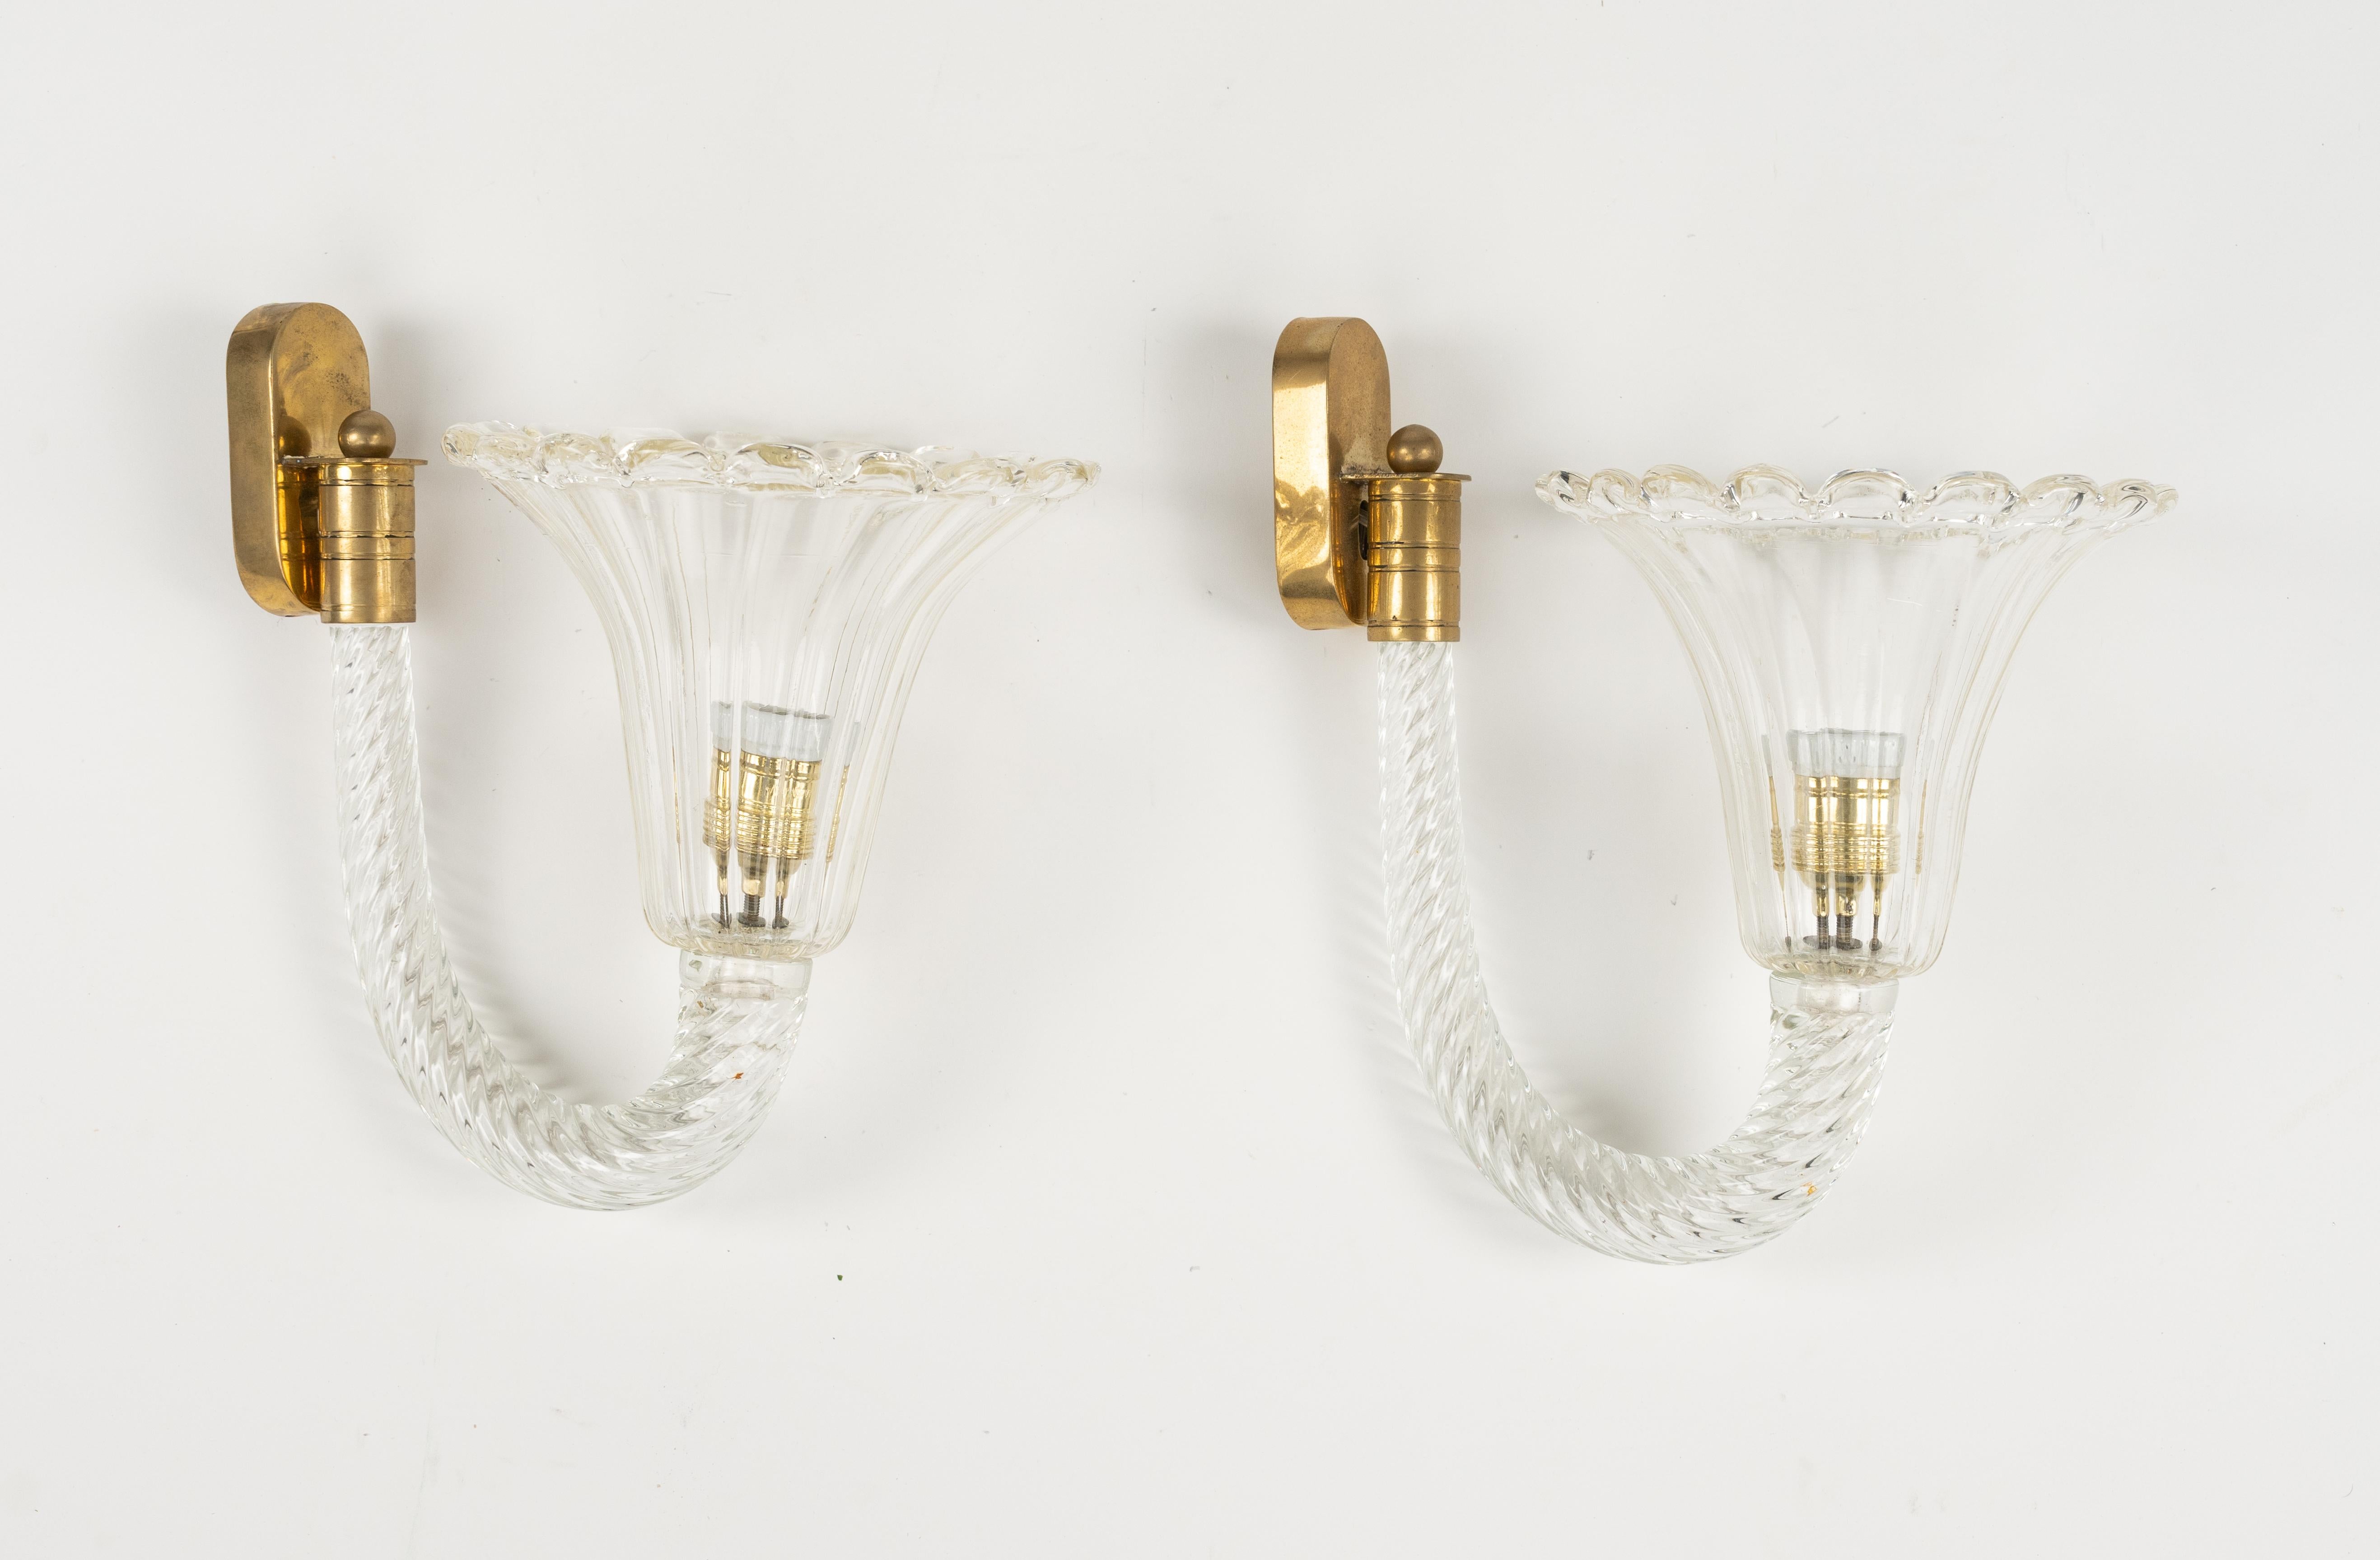 Pair of Sconces Murano Glass & Brass Barovier & Toso Style, Italy 1950s For Sale 5